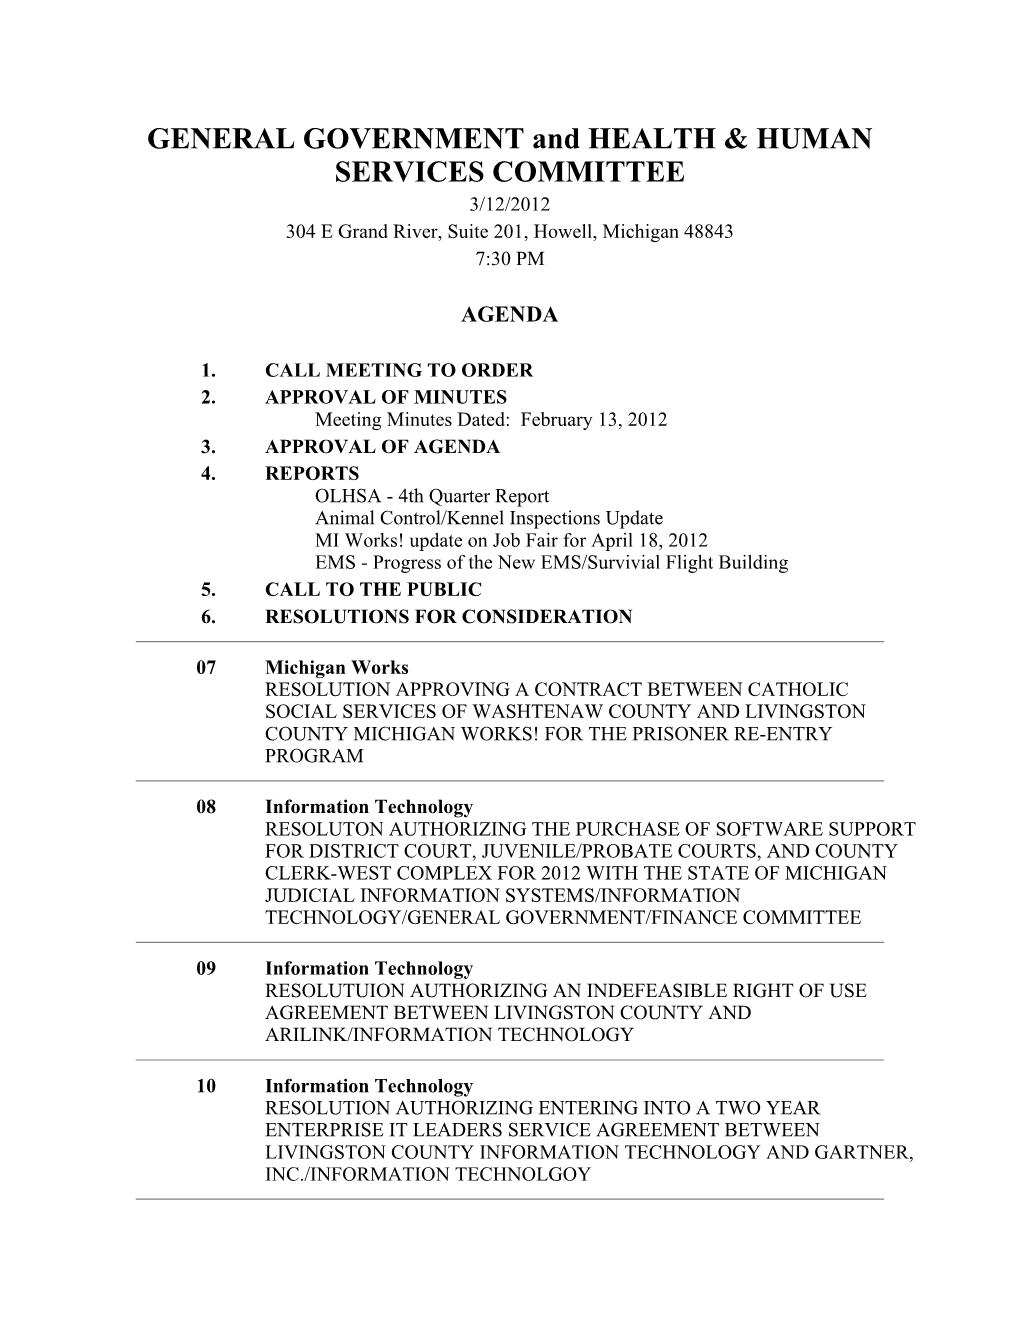 GENERAL GOVERNMENT and HEALTH & HUMAN SERVICES COMMITTEE